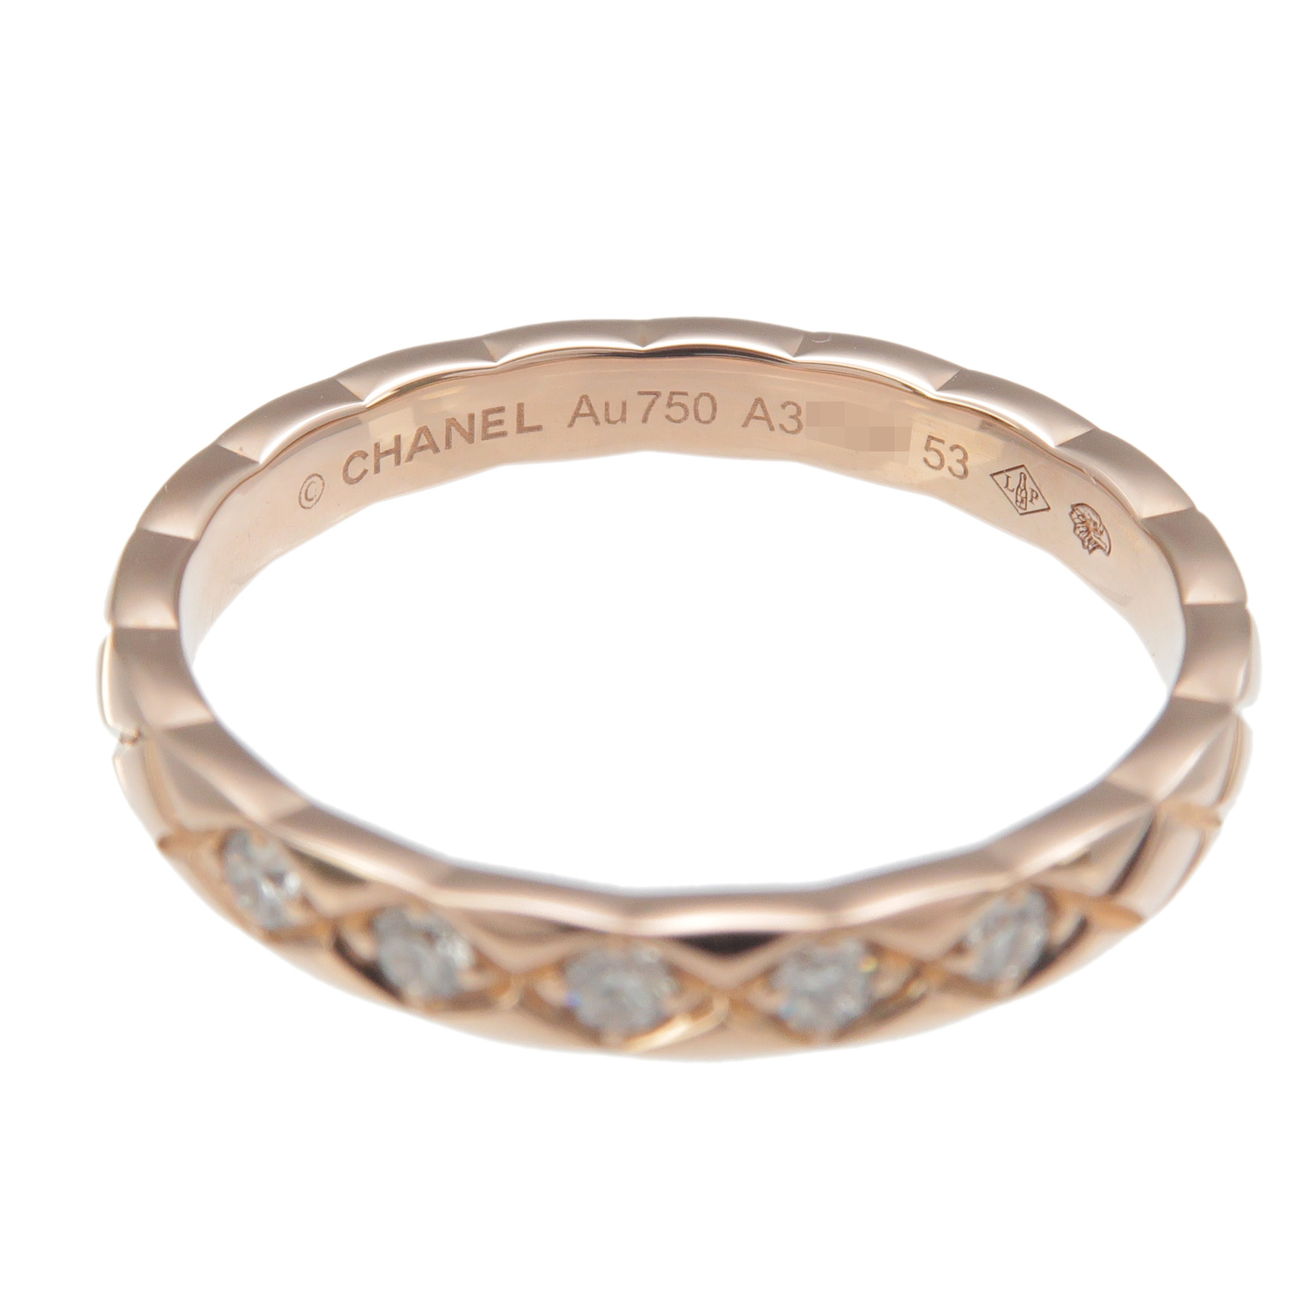 Chanel Coco Crush diamonds and gold ring